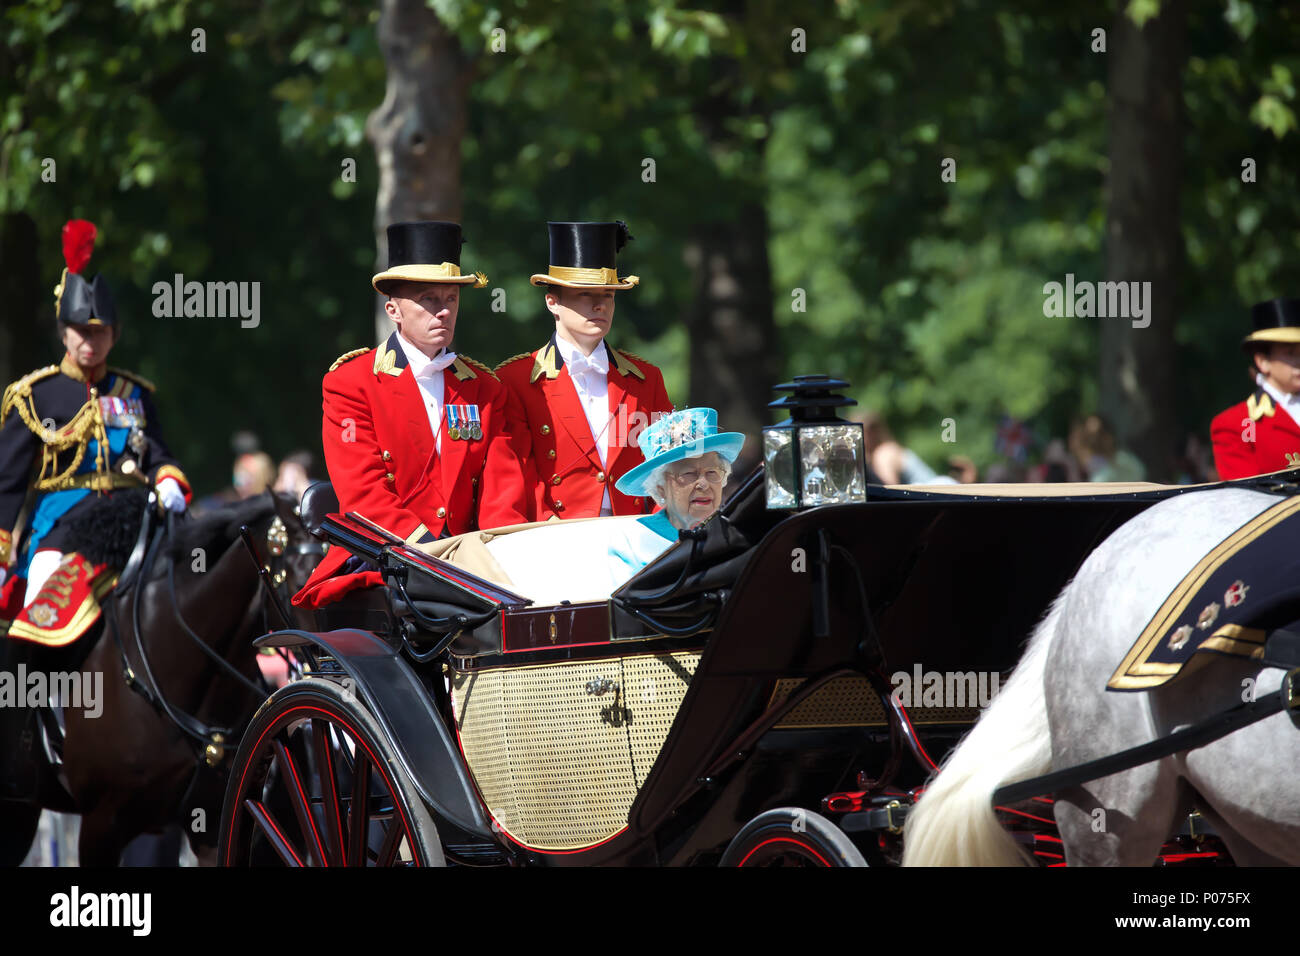 London,UK,9th June 2018,The annual Trooping the Colour took place in Horseguards Parade to mark the Queens official Birthday. It was a traditional ceremony full of military pomp and pageantry. Members of the Royal Family ride in carriages and on horseback along The Mall, London on their way to the ceremony in Horseguards Parade. Credit Keith Larby/Alamy Live News Stock Photo